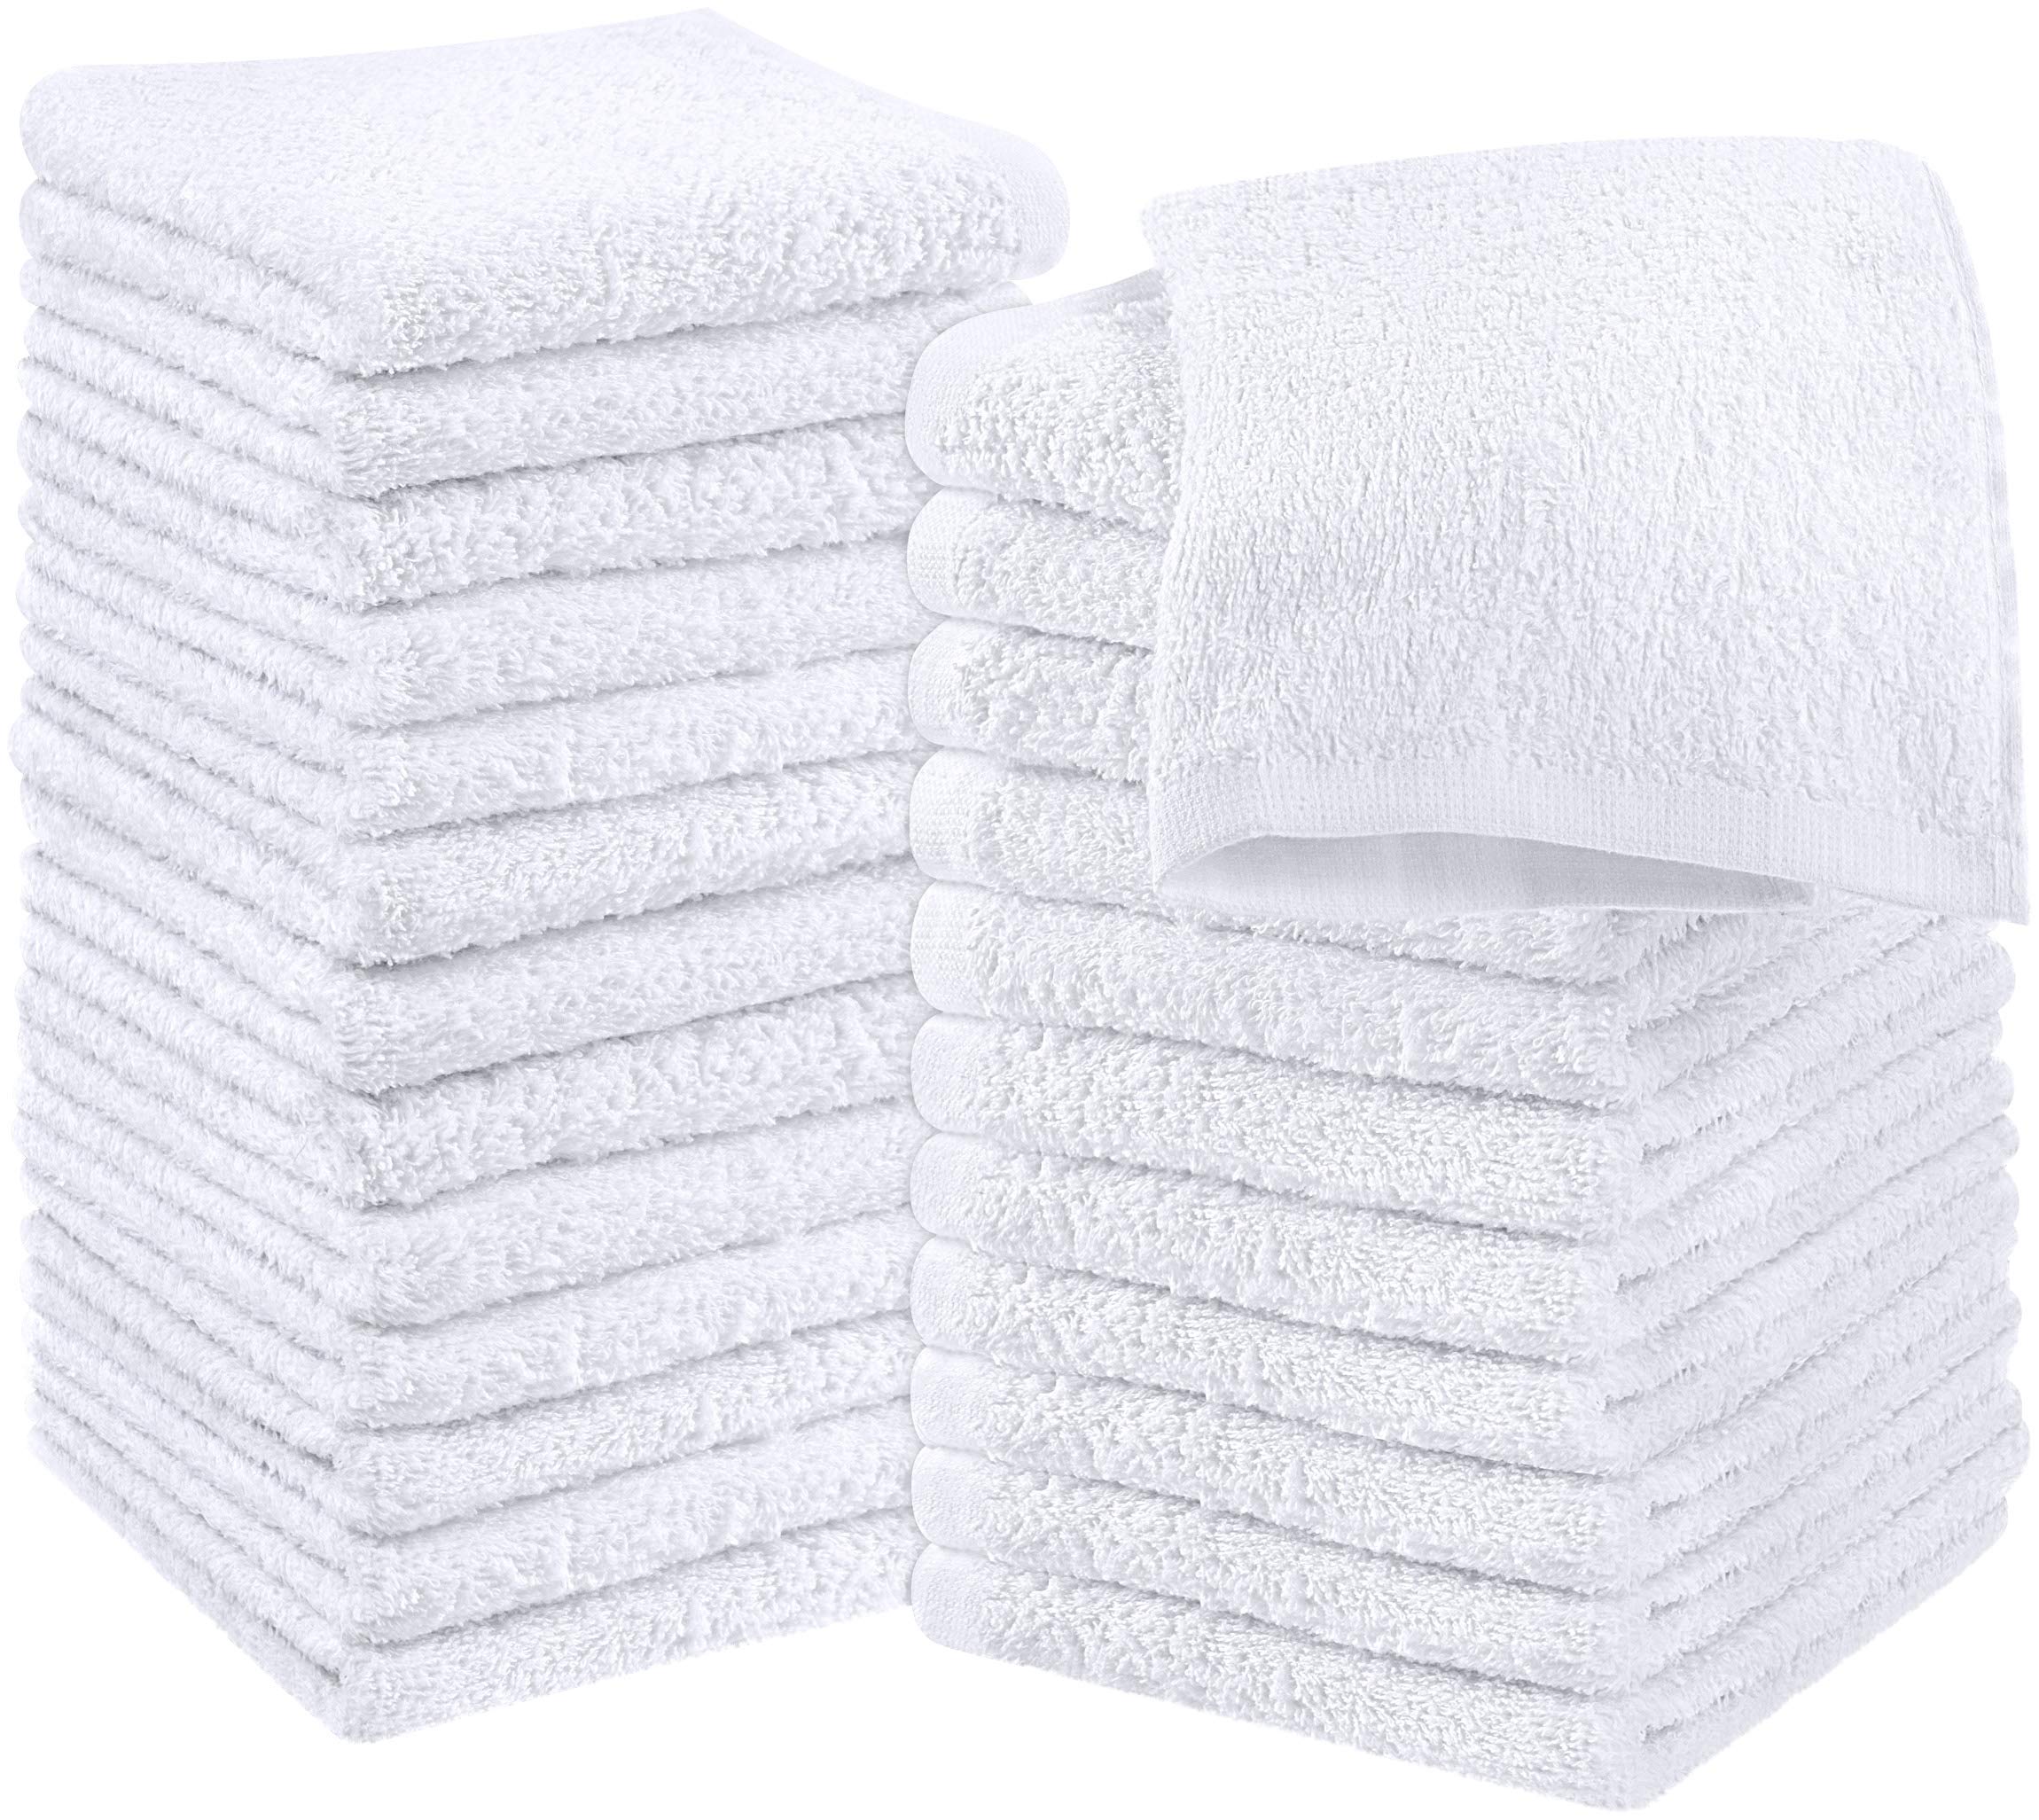 Book Cover Utopia Towels Cotton Washcloths Set - 100% Ring Spun Cotton, Premium Quality Flannel Face Cloths, Highly Absorbent and Soft Feel Fingertip Towels (24 Pack, White) White 24